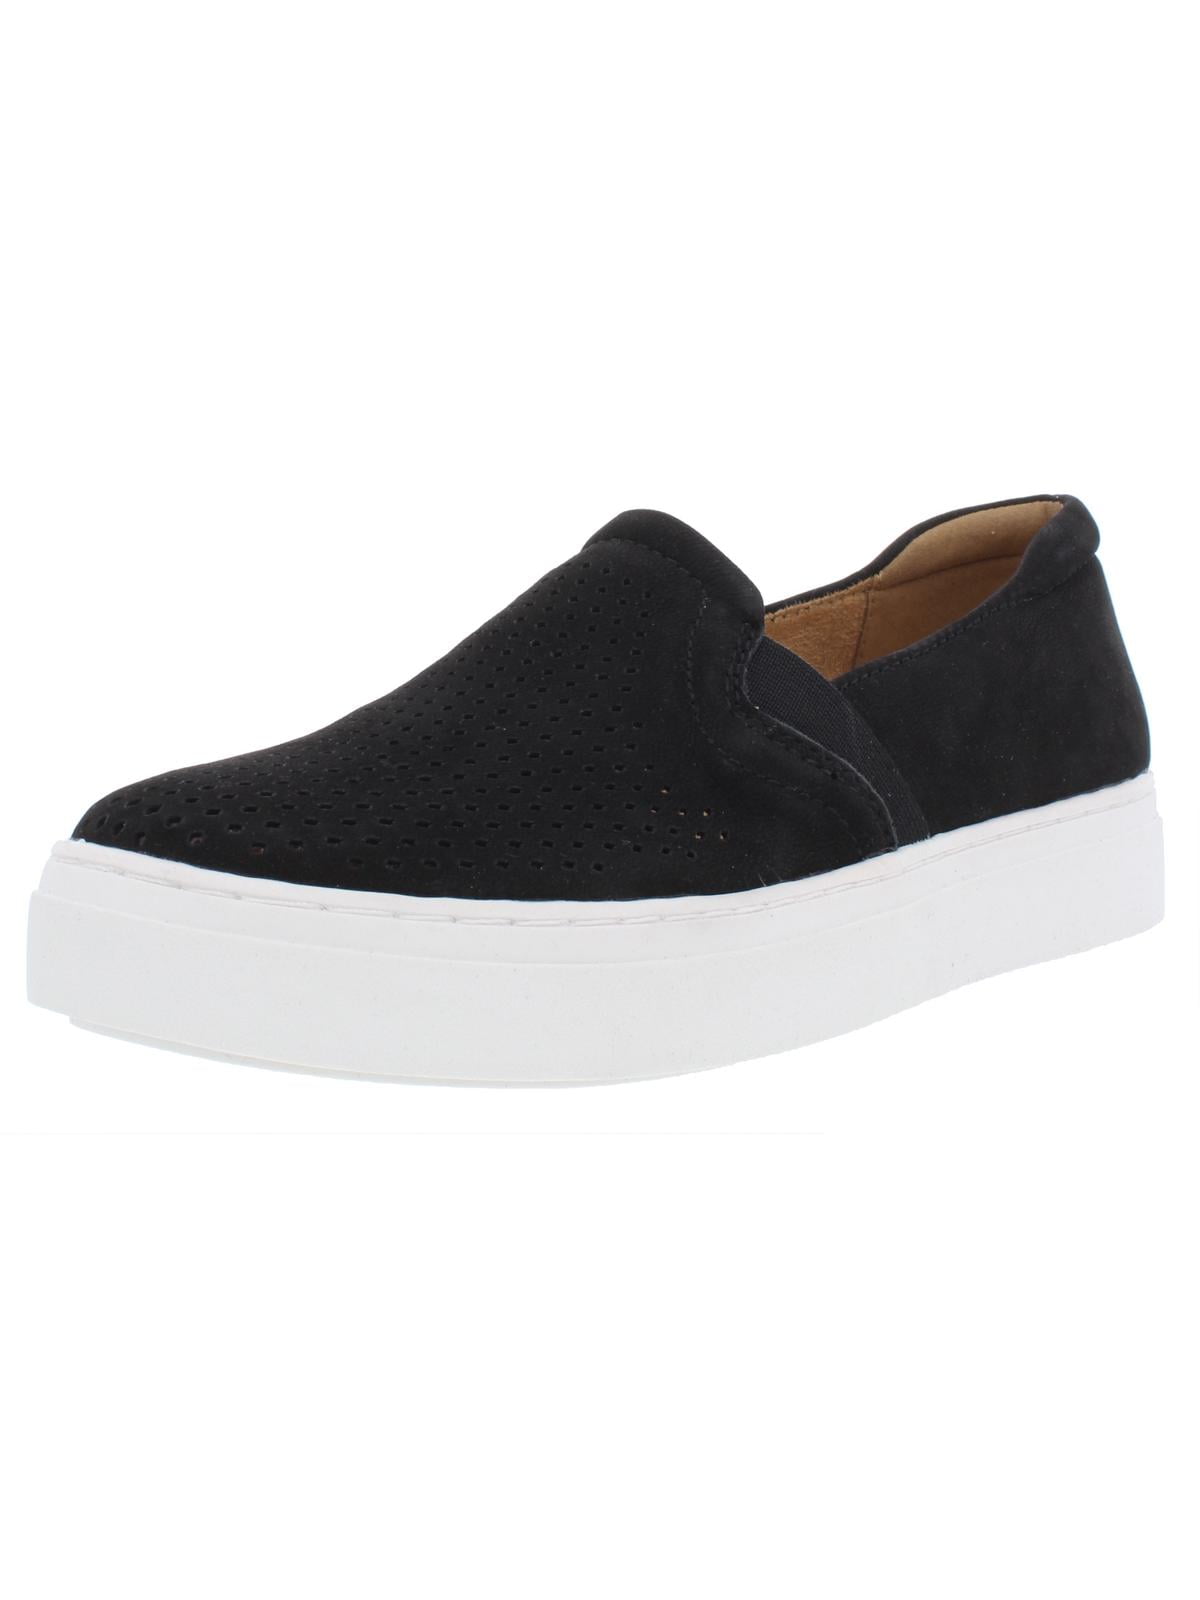 naturalizer casual shoes